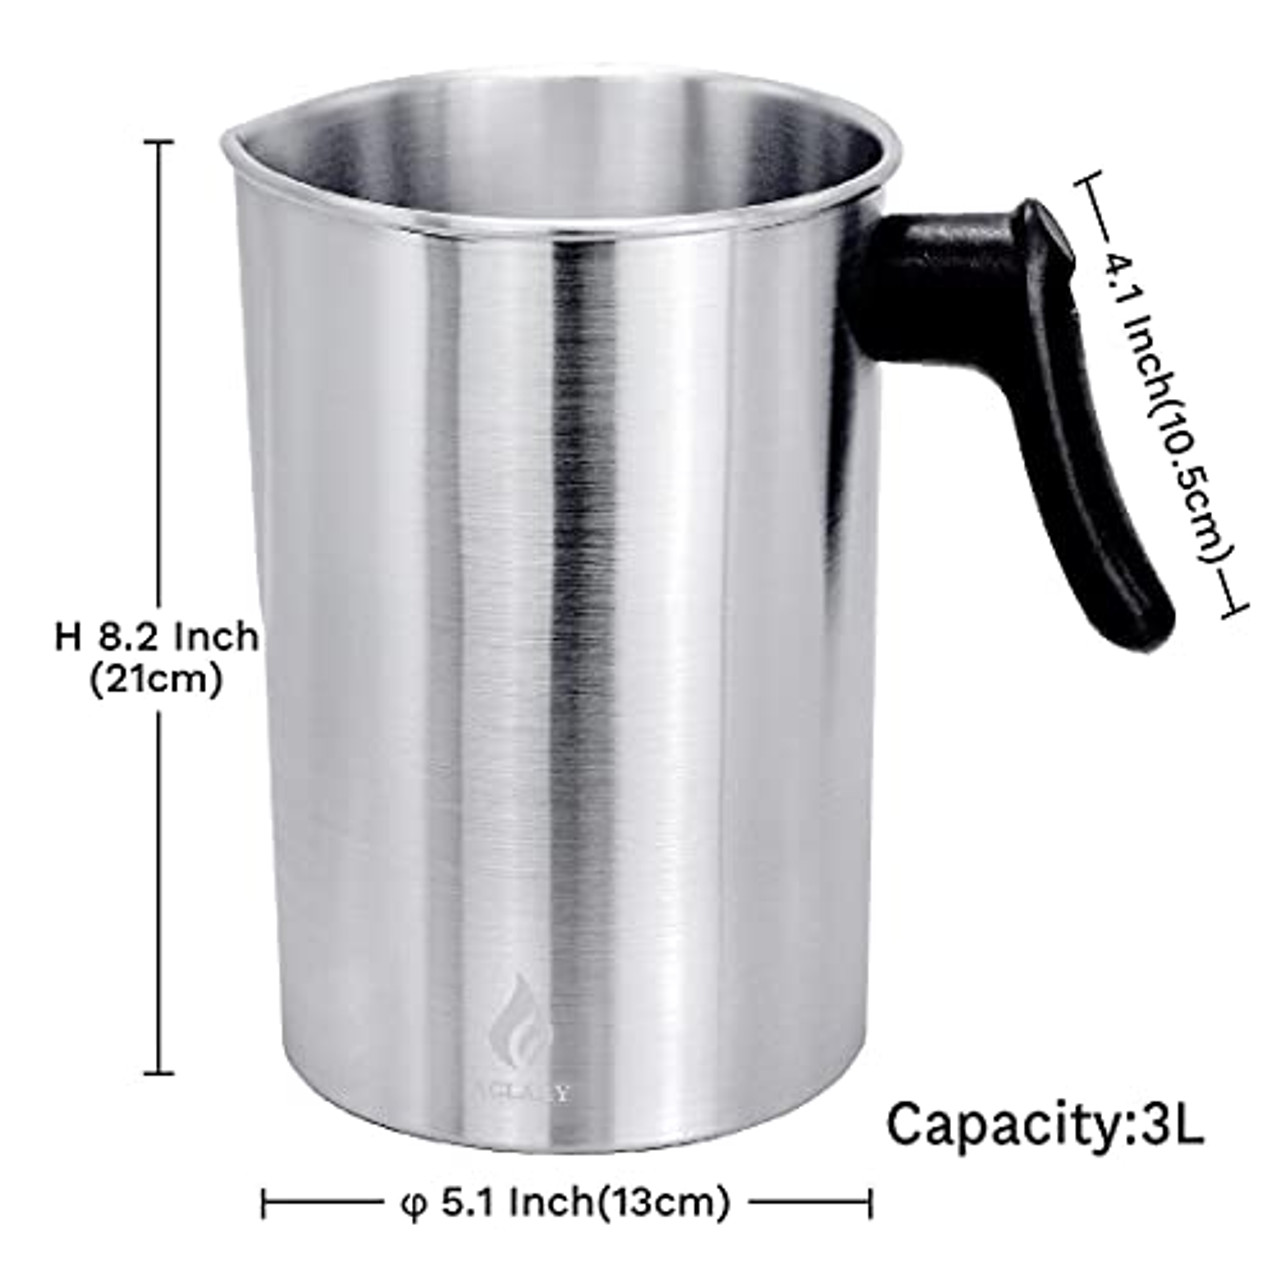 ABK Candle Making Pouring Pot 1800ml/60oz Double Boiler Wax Melting Pot 304 Stainless Steel Candle Making Pitcher with Heat-Resistant Handle and Dripl